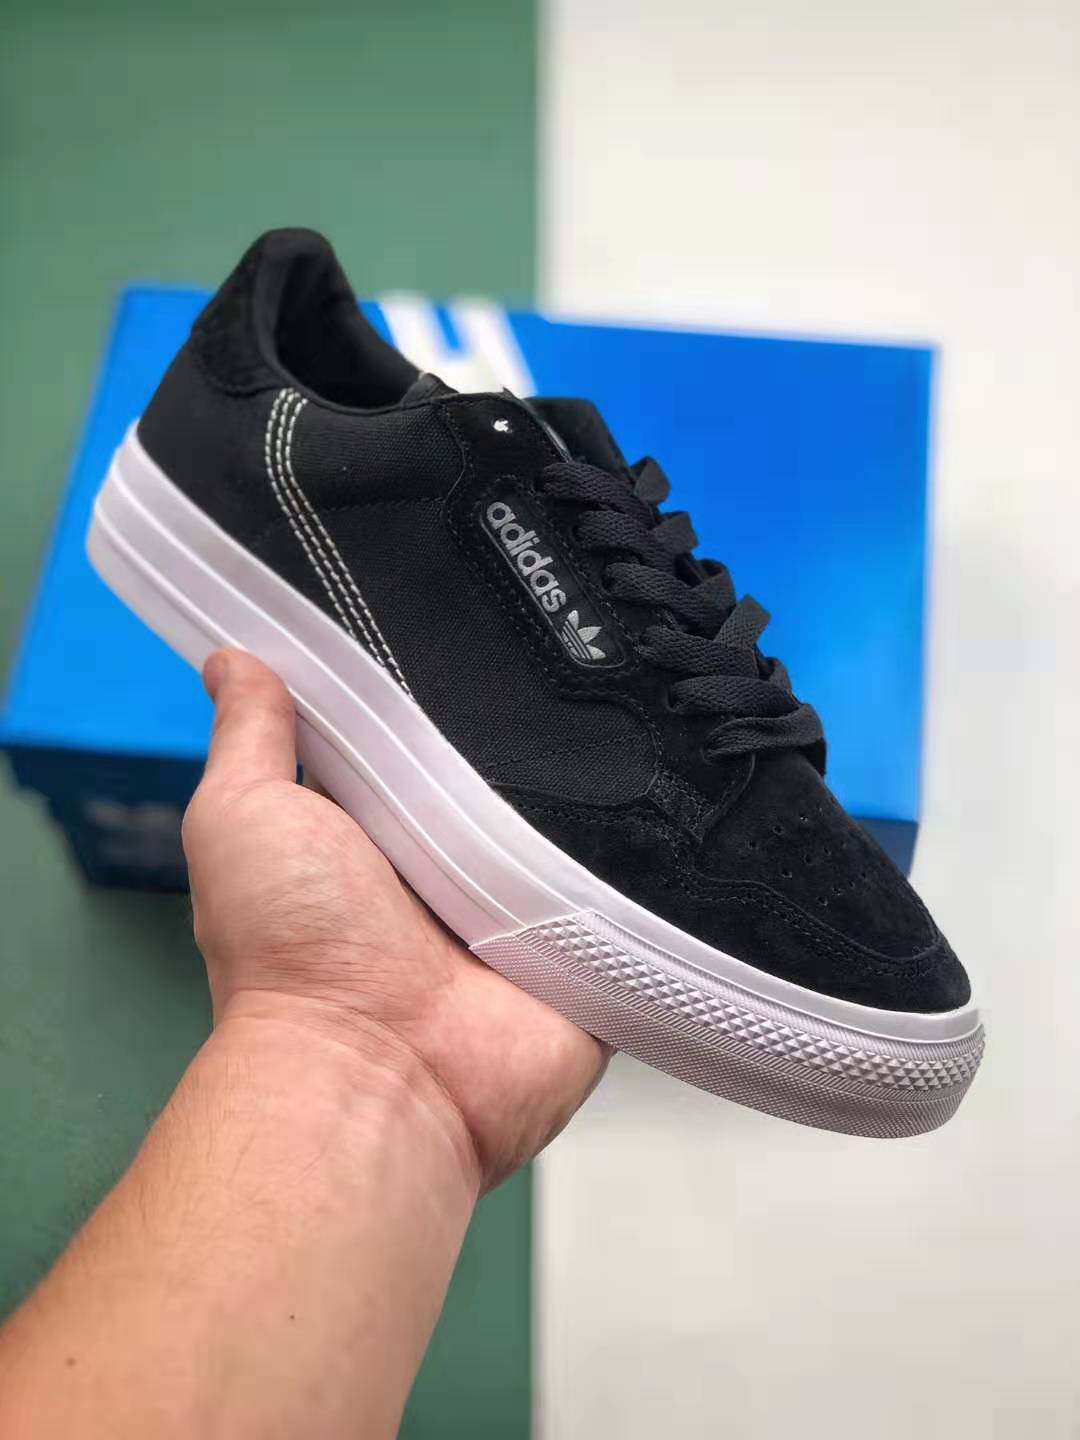 Adidas Continental Vulc Core Black EF3524 - Classic Style and Durability